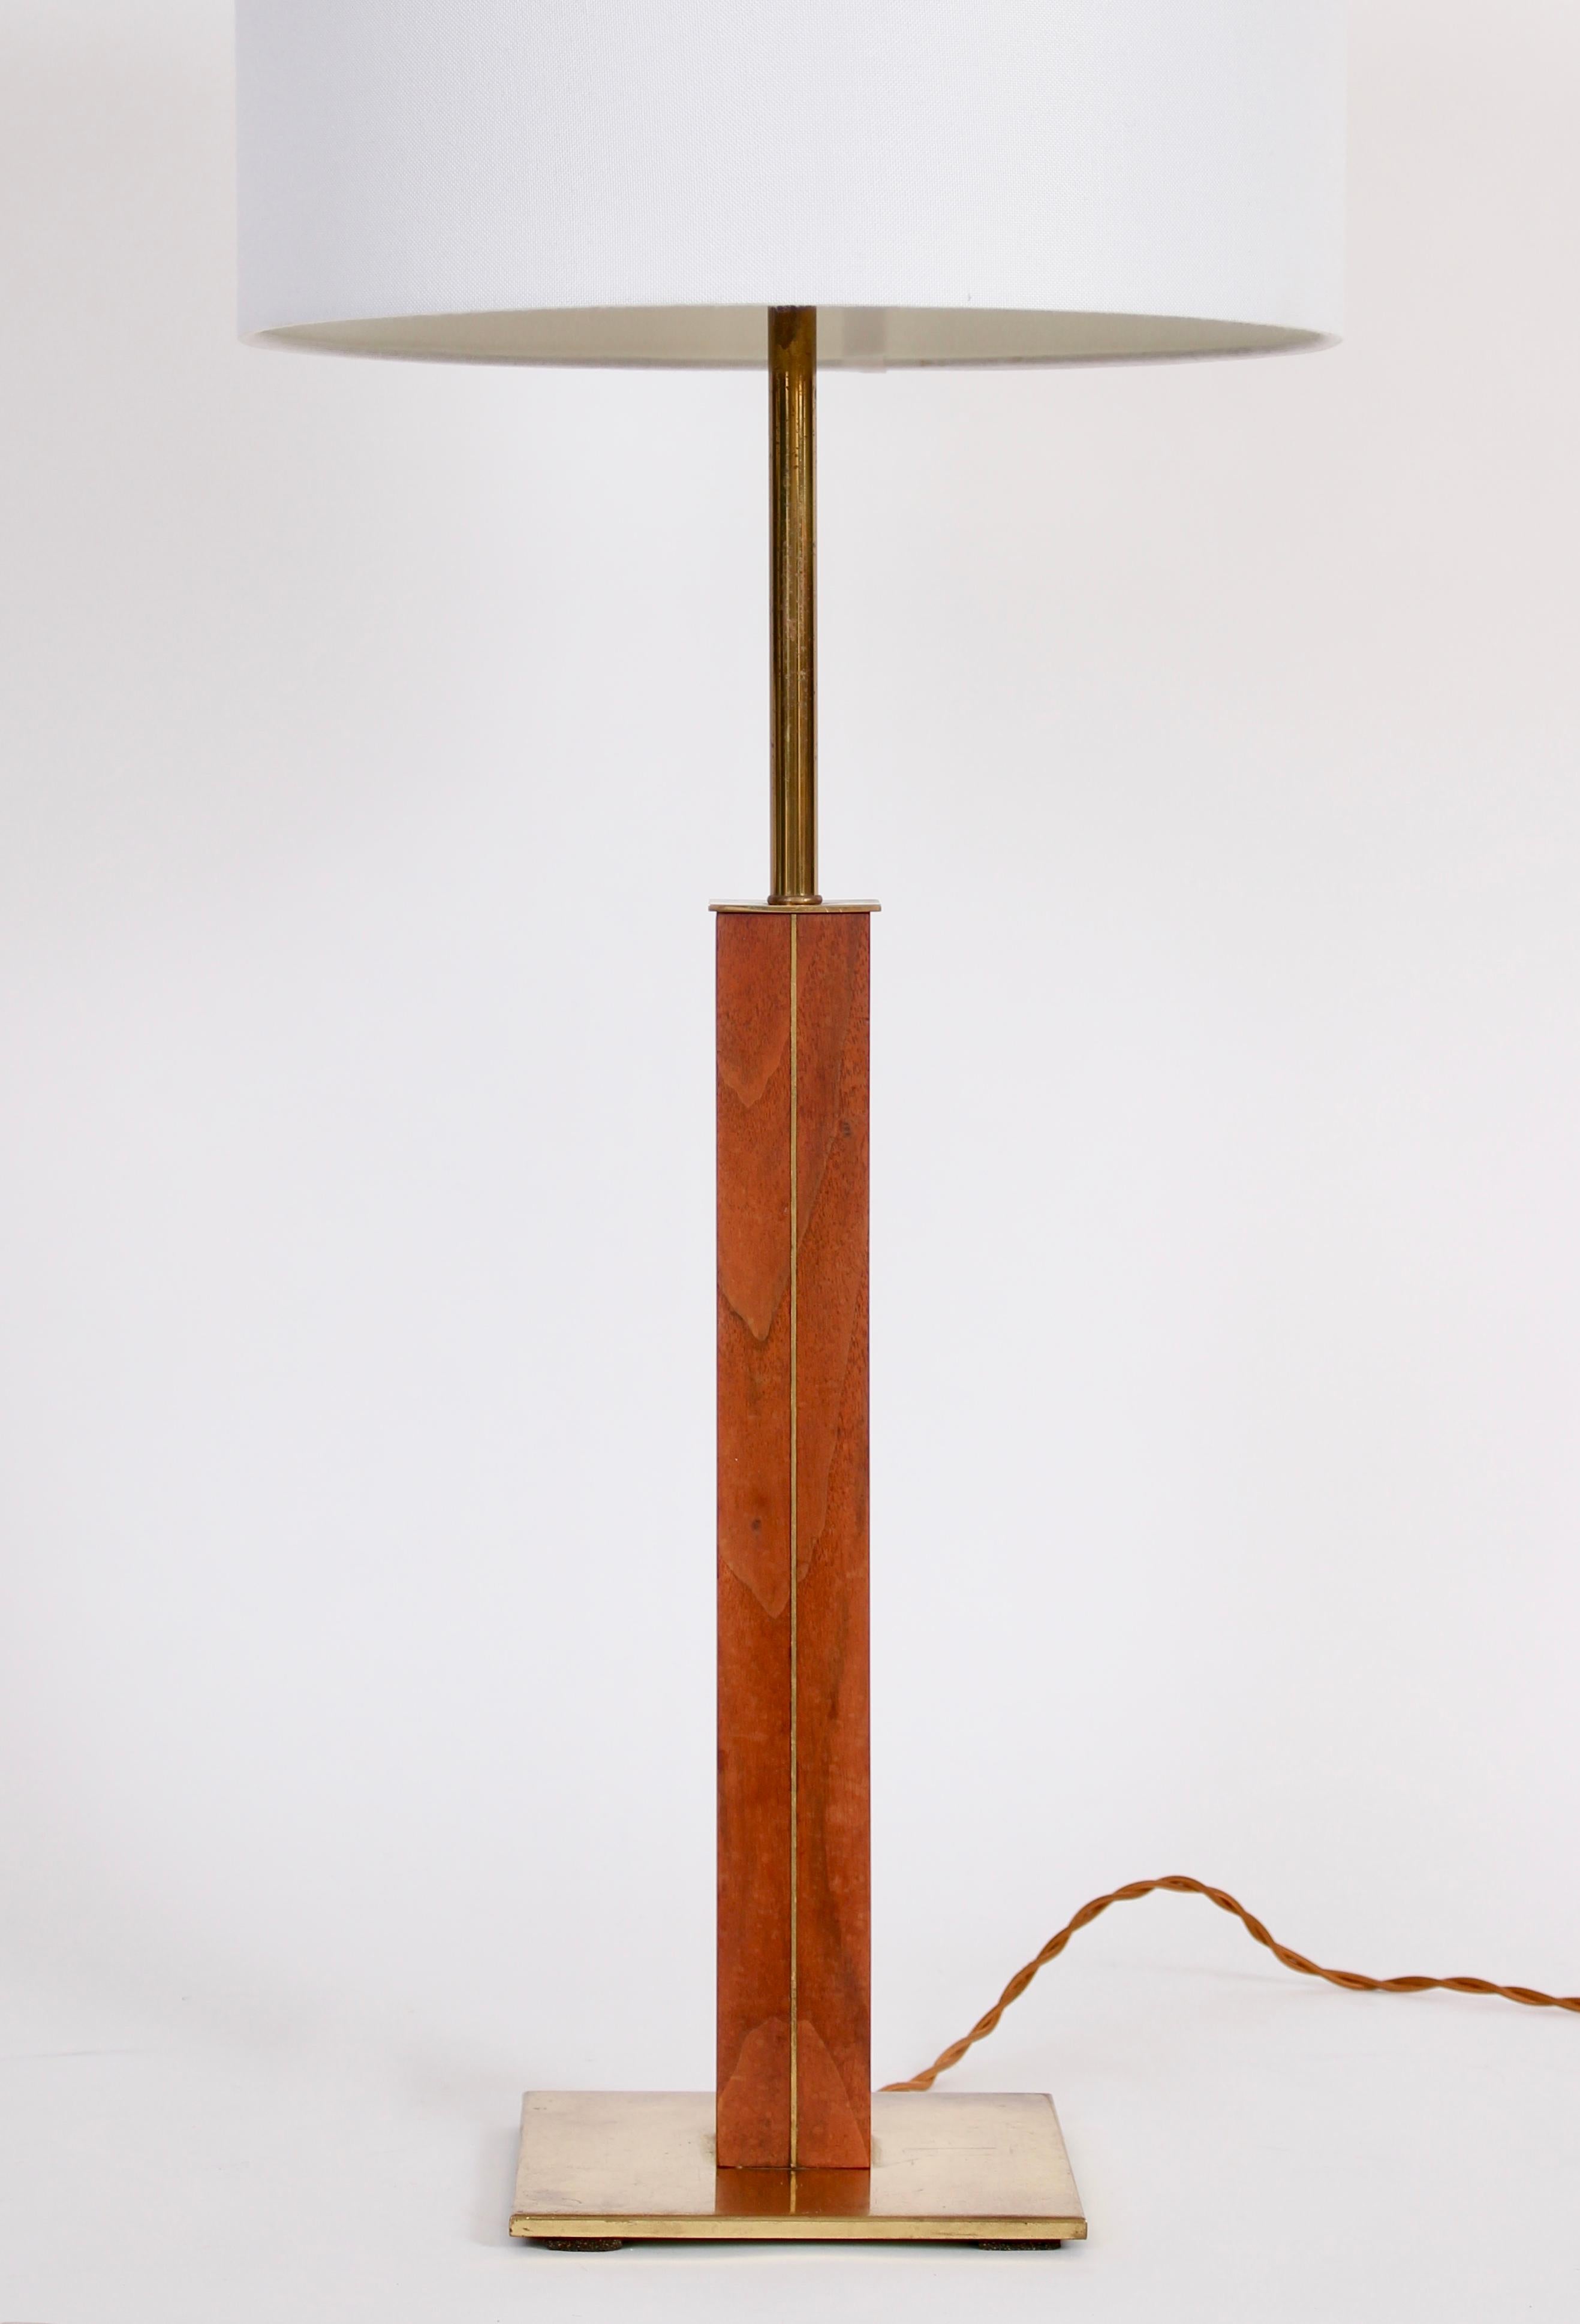 Towering Walter Von Nessen designed Nessen Studios Walnut & Brass Table Lamp, 1960s. Featuring an architectural solid hardwood column with vertical brass inlay. Small footprint. Adjustable double sockets. Shade shown for display only and not for